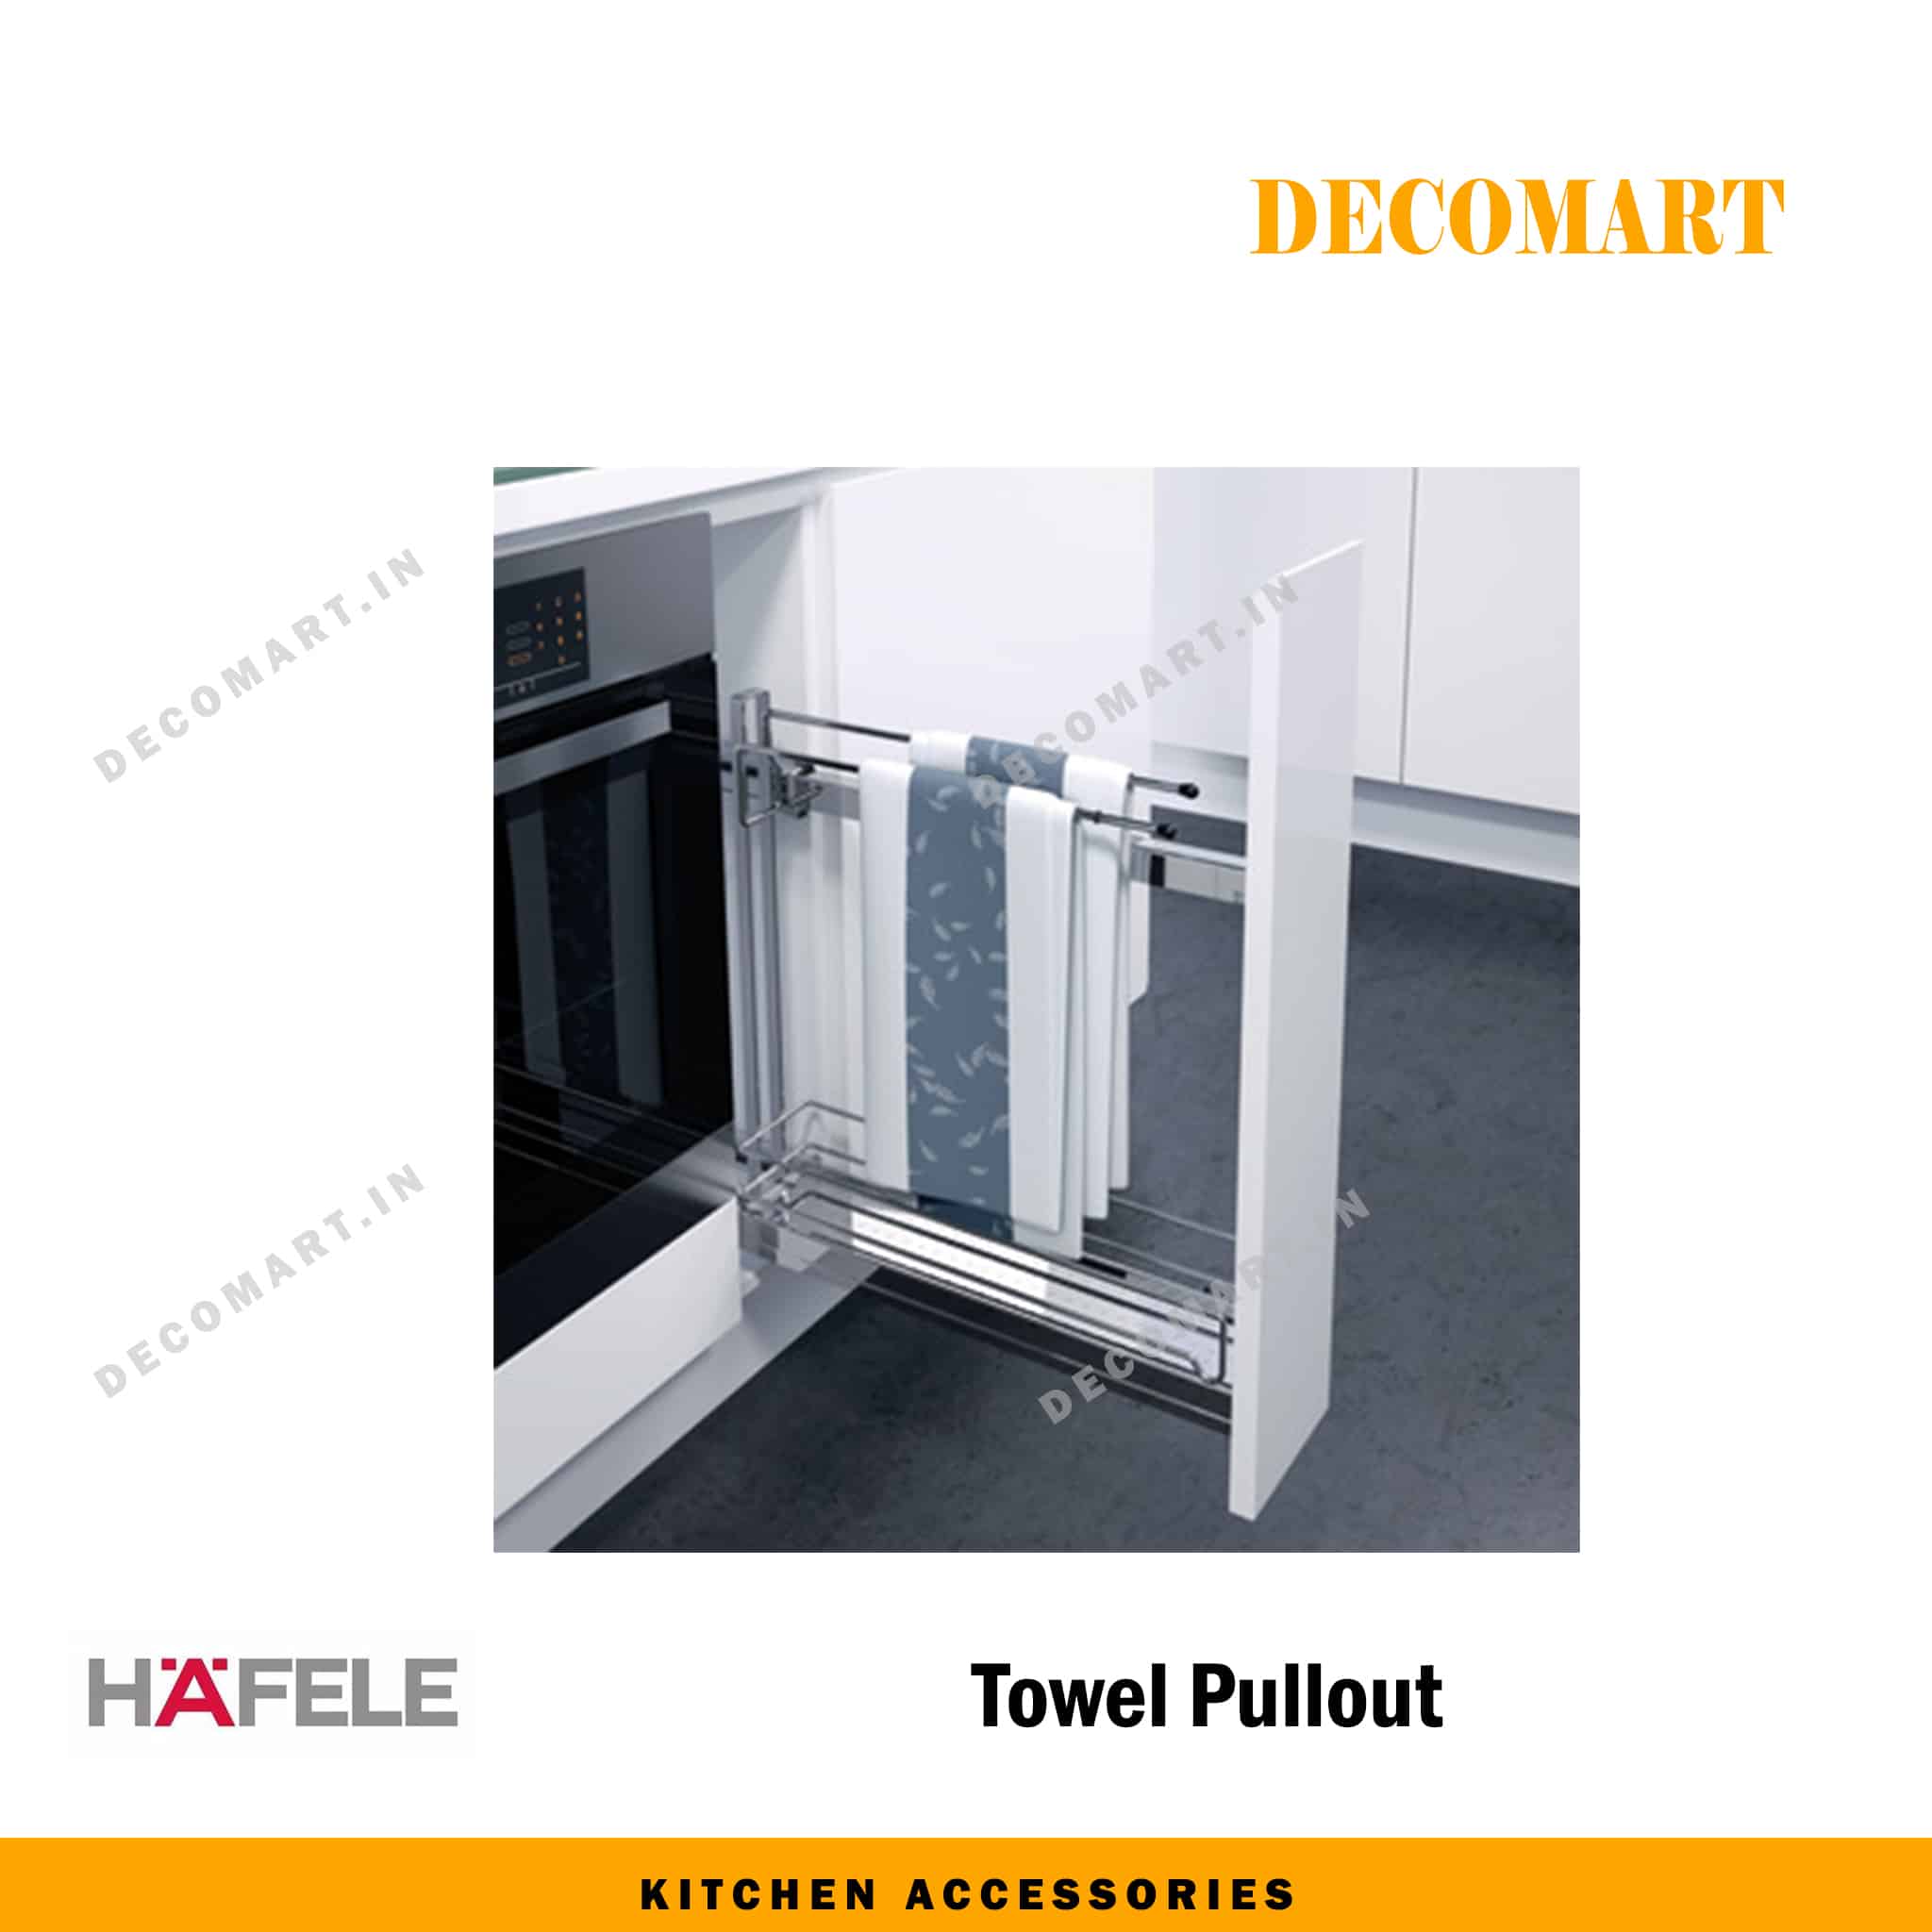 Hafele Towel Pullout